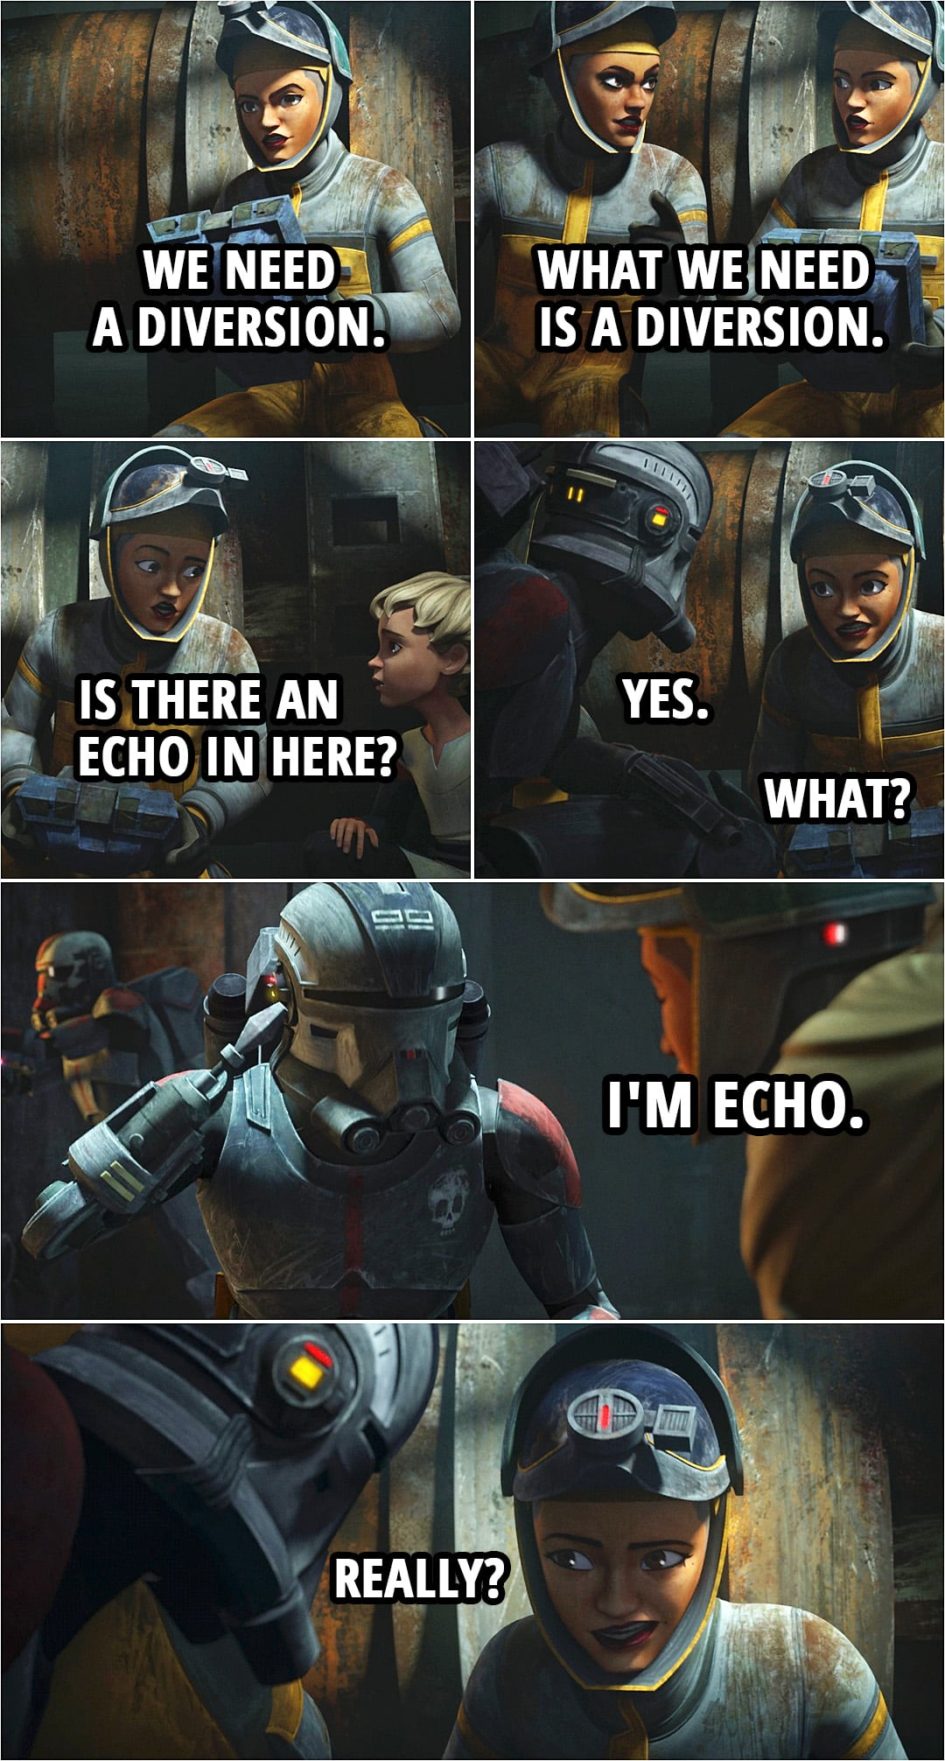 Quote from Star Wars: The Bad Batch 1x06 | Trace Martez: We need a diversion. Rafa Martez: What we need is a diversion. Trace Martez: Is there an echo in here? Echo: Yes. Trace Martez: What? Echo: I'm Echo. Trace Martez: Really?